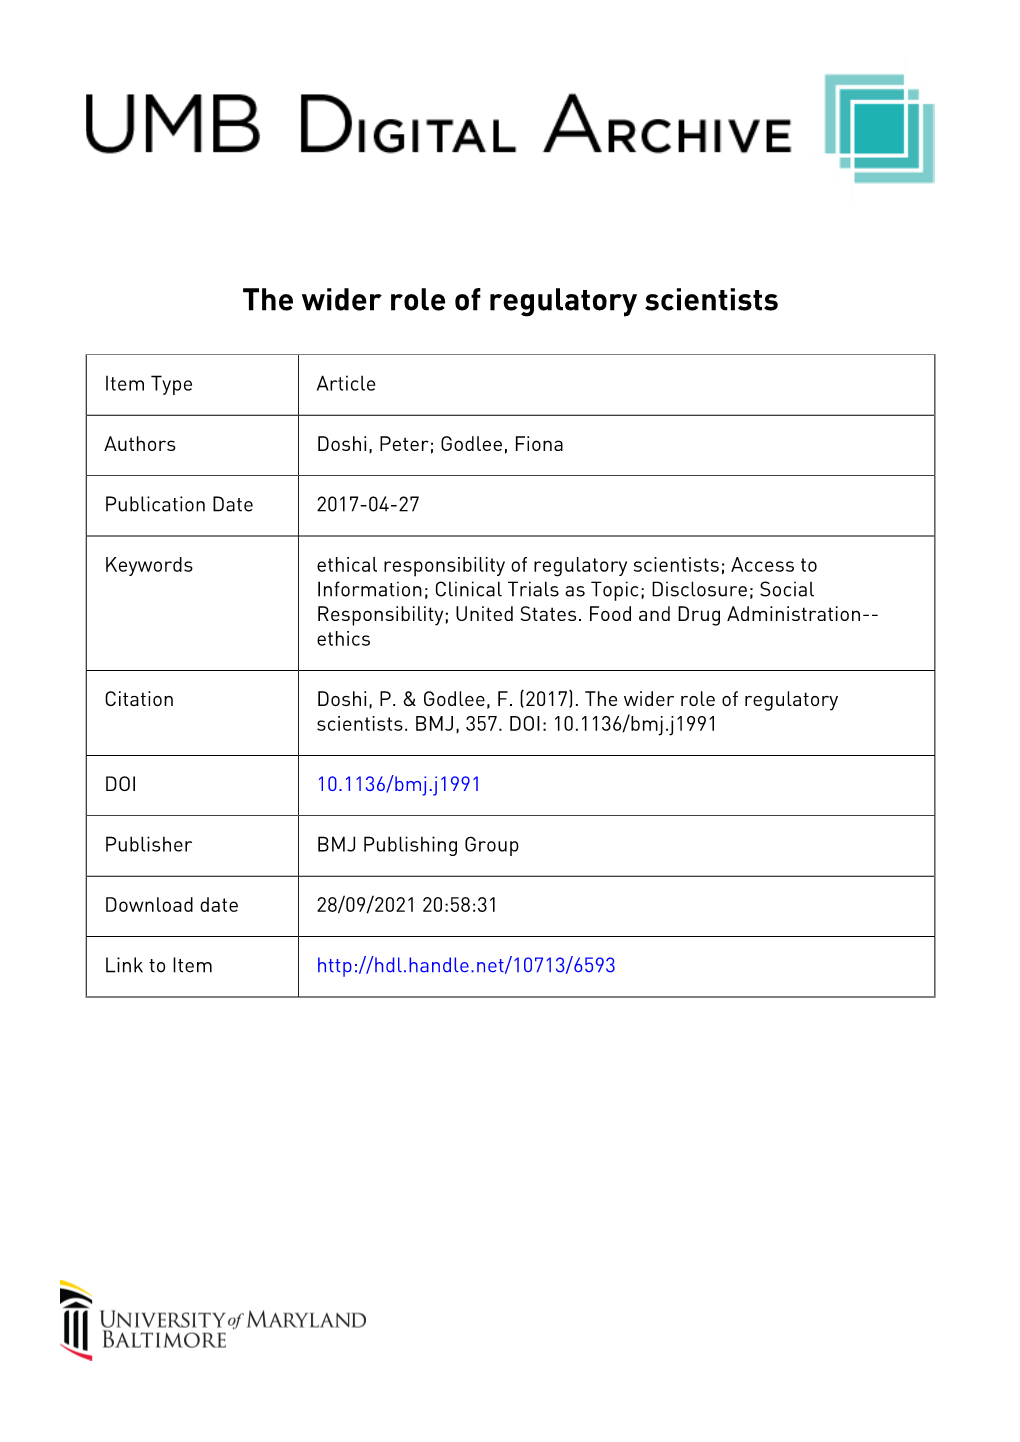 The Wider Role of Regulatory Scientists